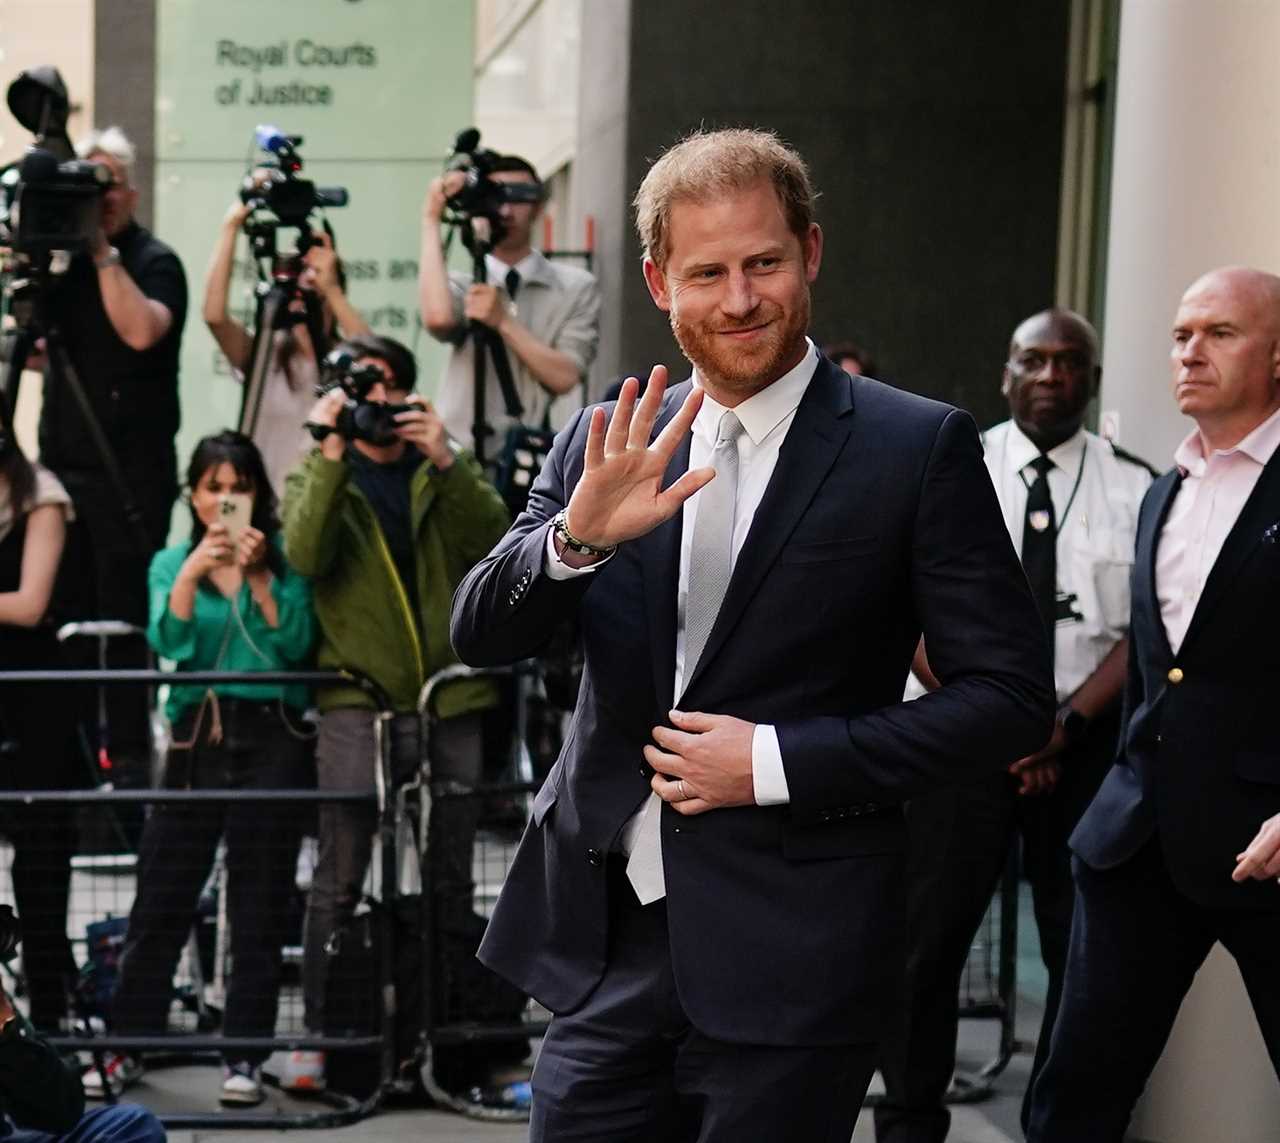 Prince Harry’s court whinges will cost £1million – and you’ve got to pay for it